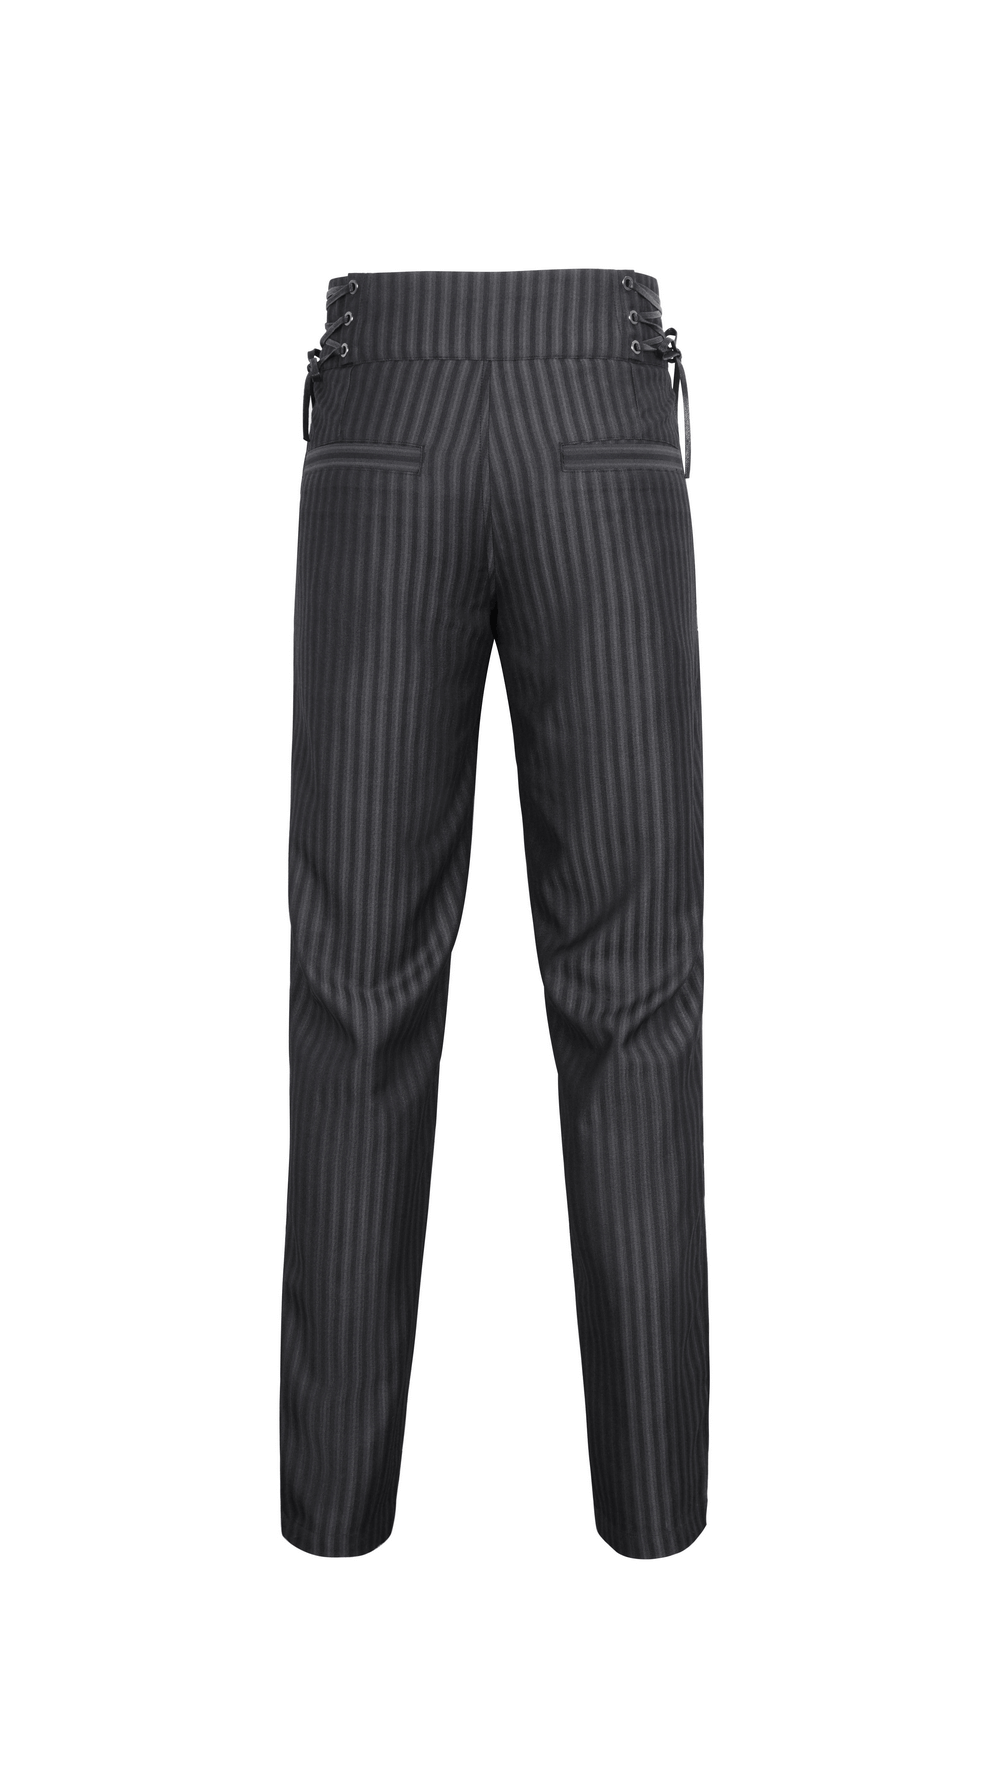 Black High-Waisted Lace-Up Side Striped Trousers